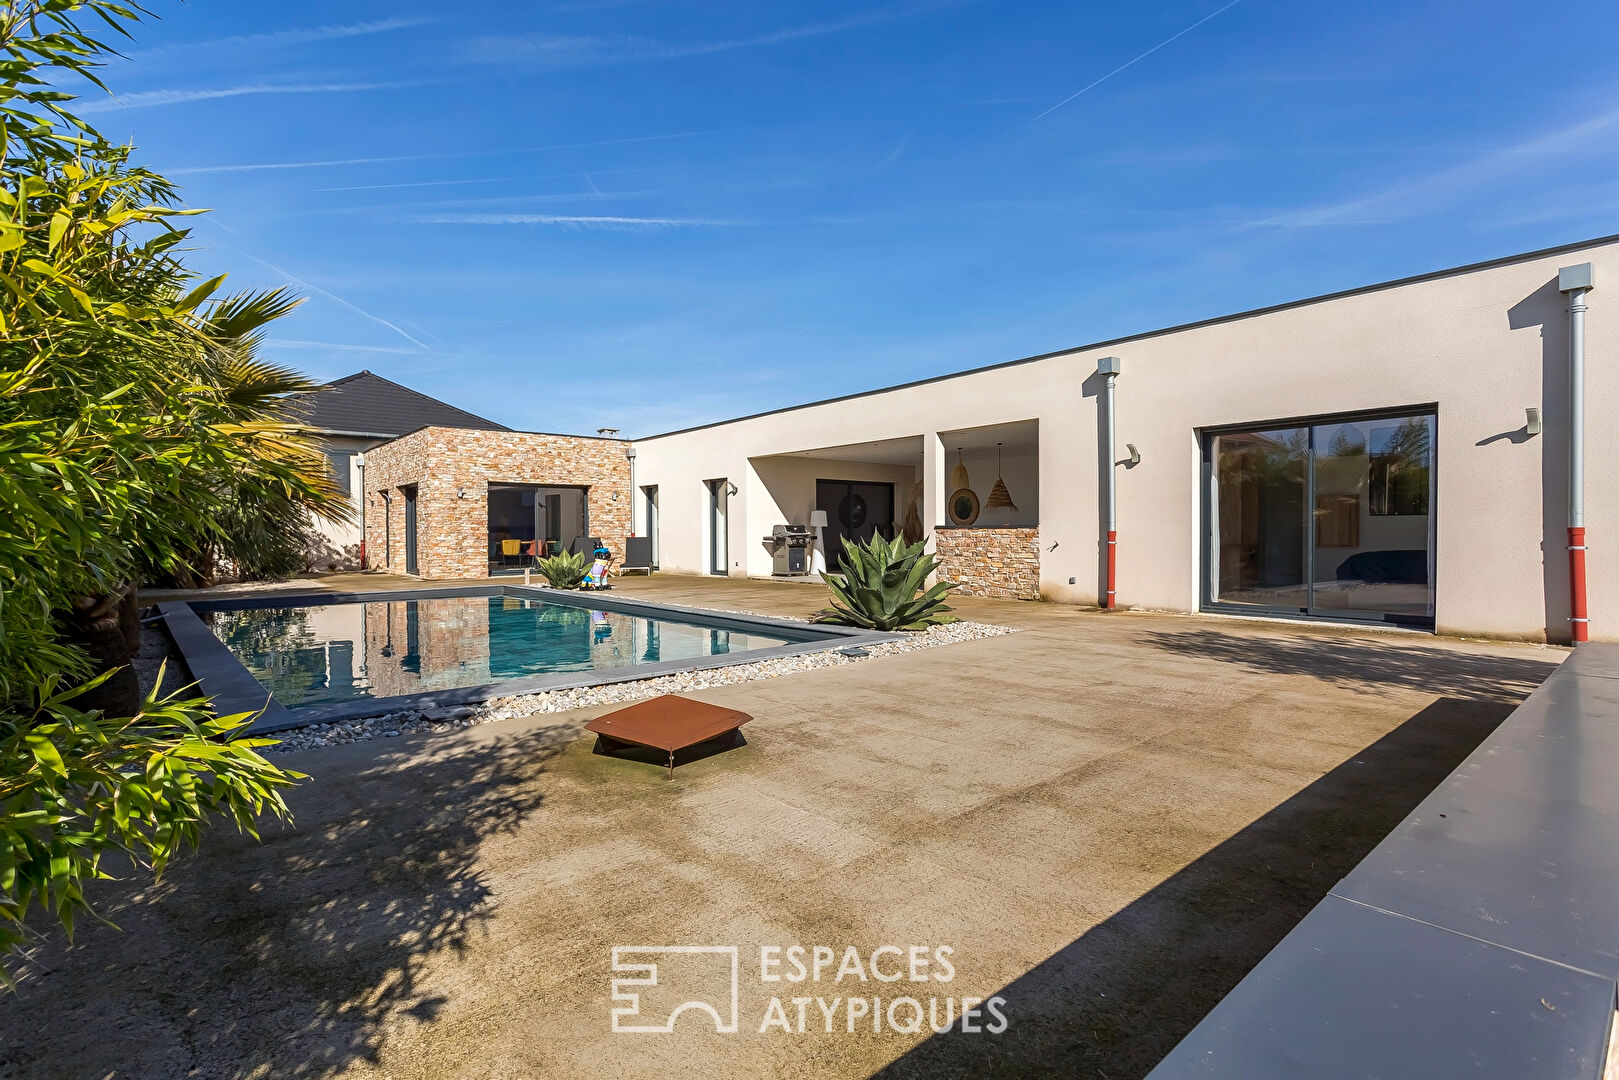 Contemporary house with swimming pool and landscaped garden